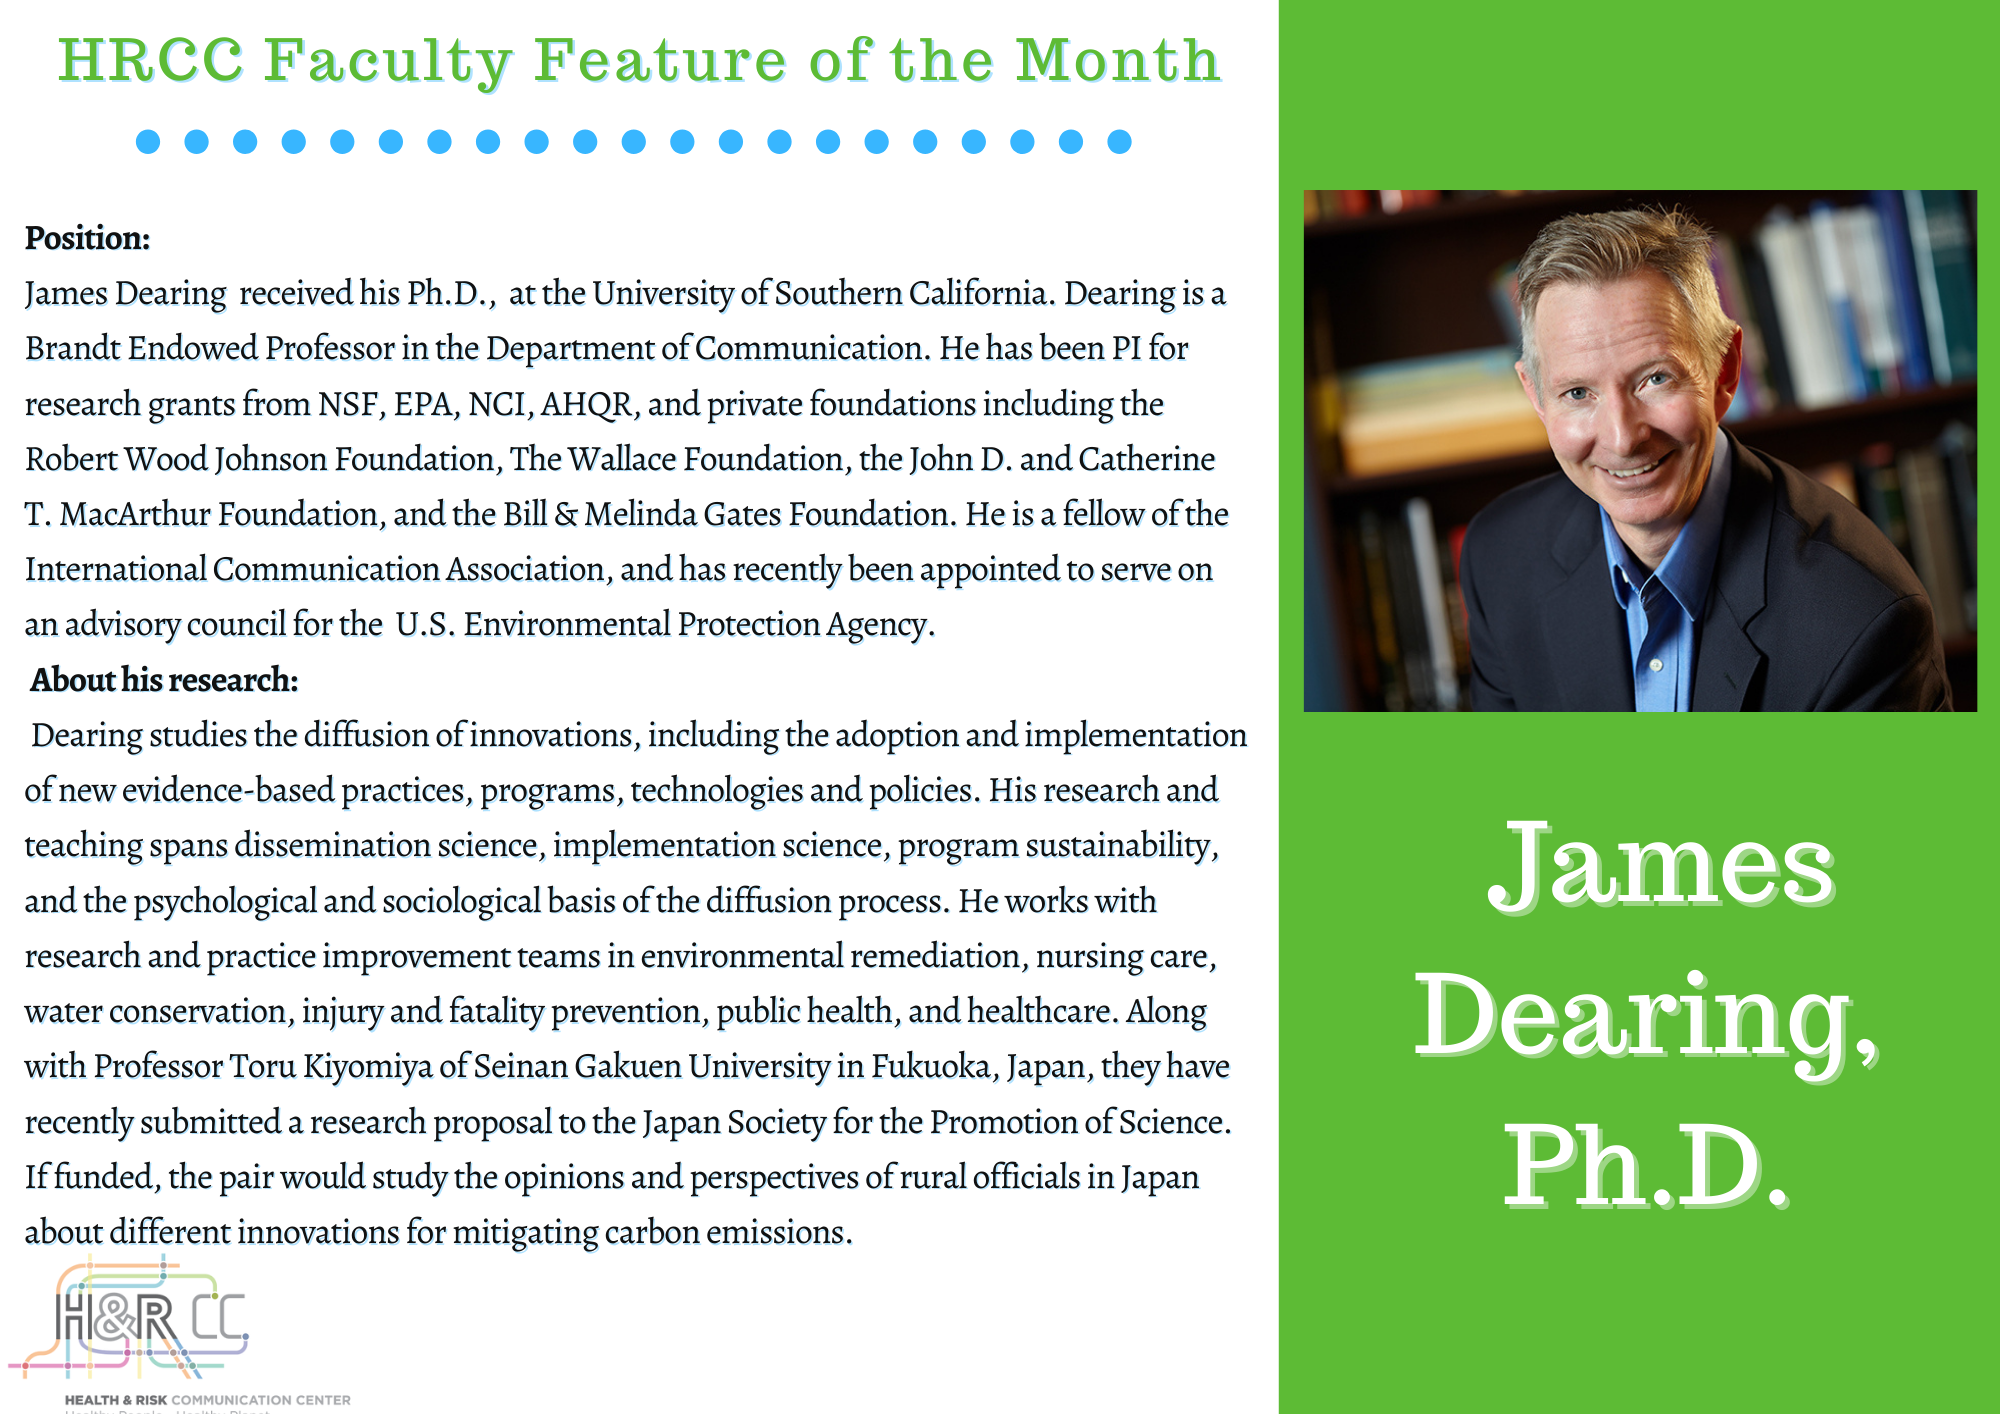 HRCC Faculty Feature May 